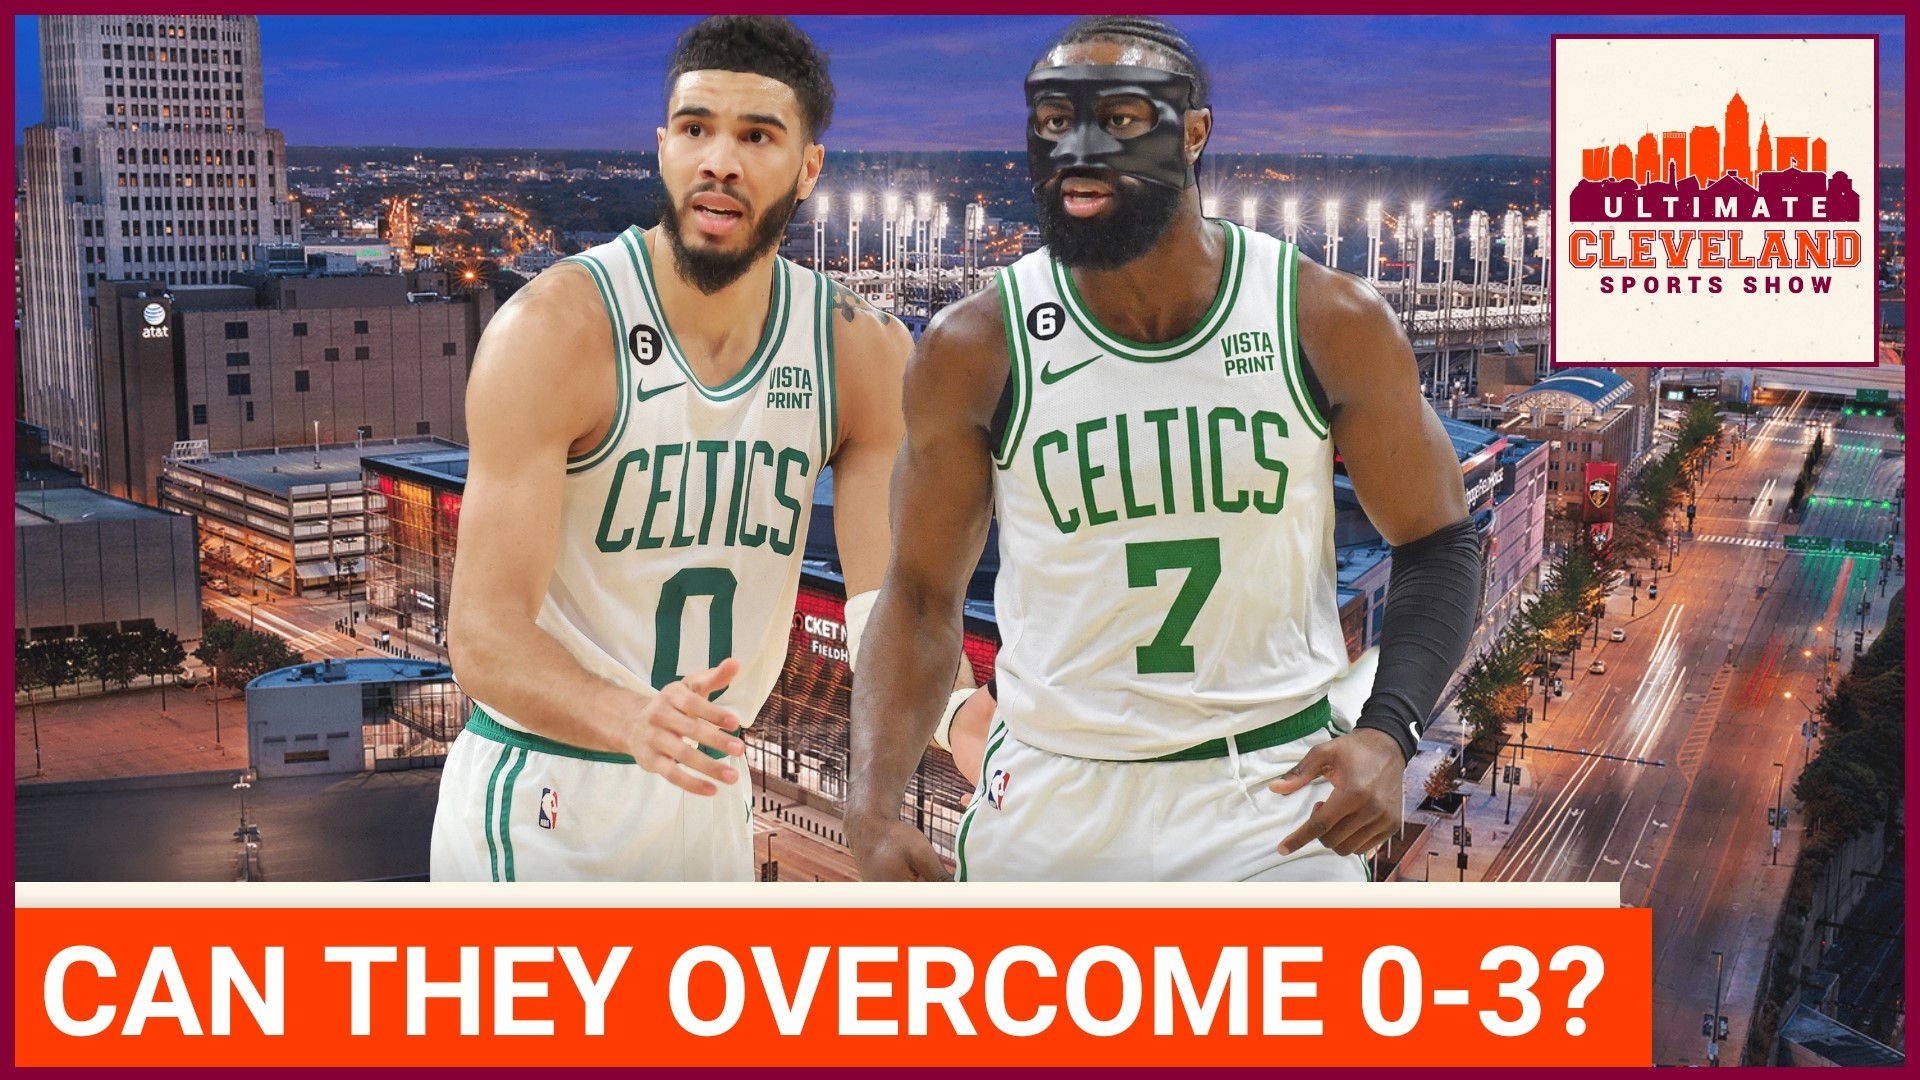 The Boston Celtics travel to Miami for game 6 of the Eastern Conference finals. Could this be the first time a NBA team will come back after being down 0-3?